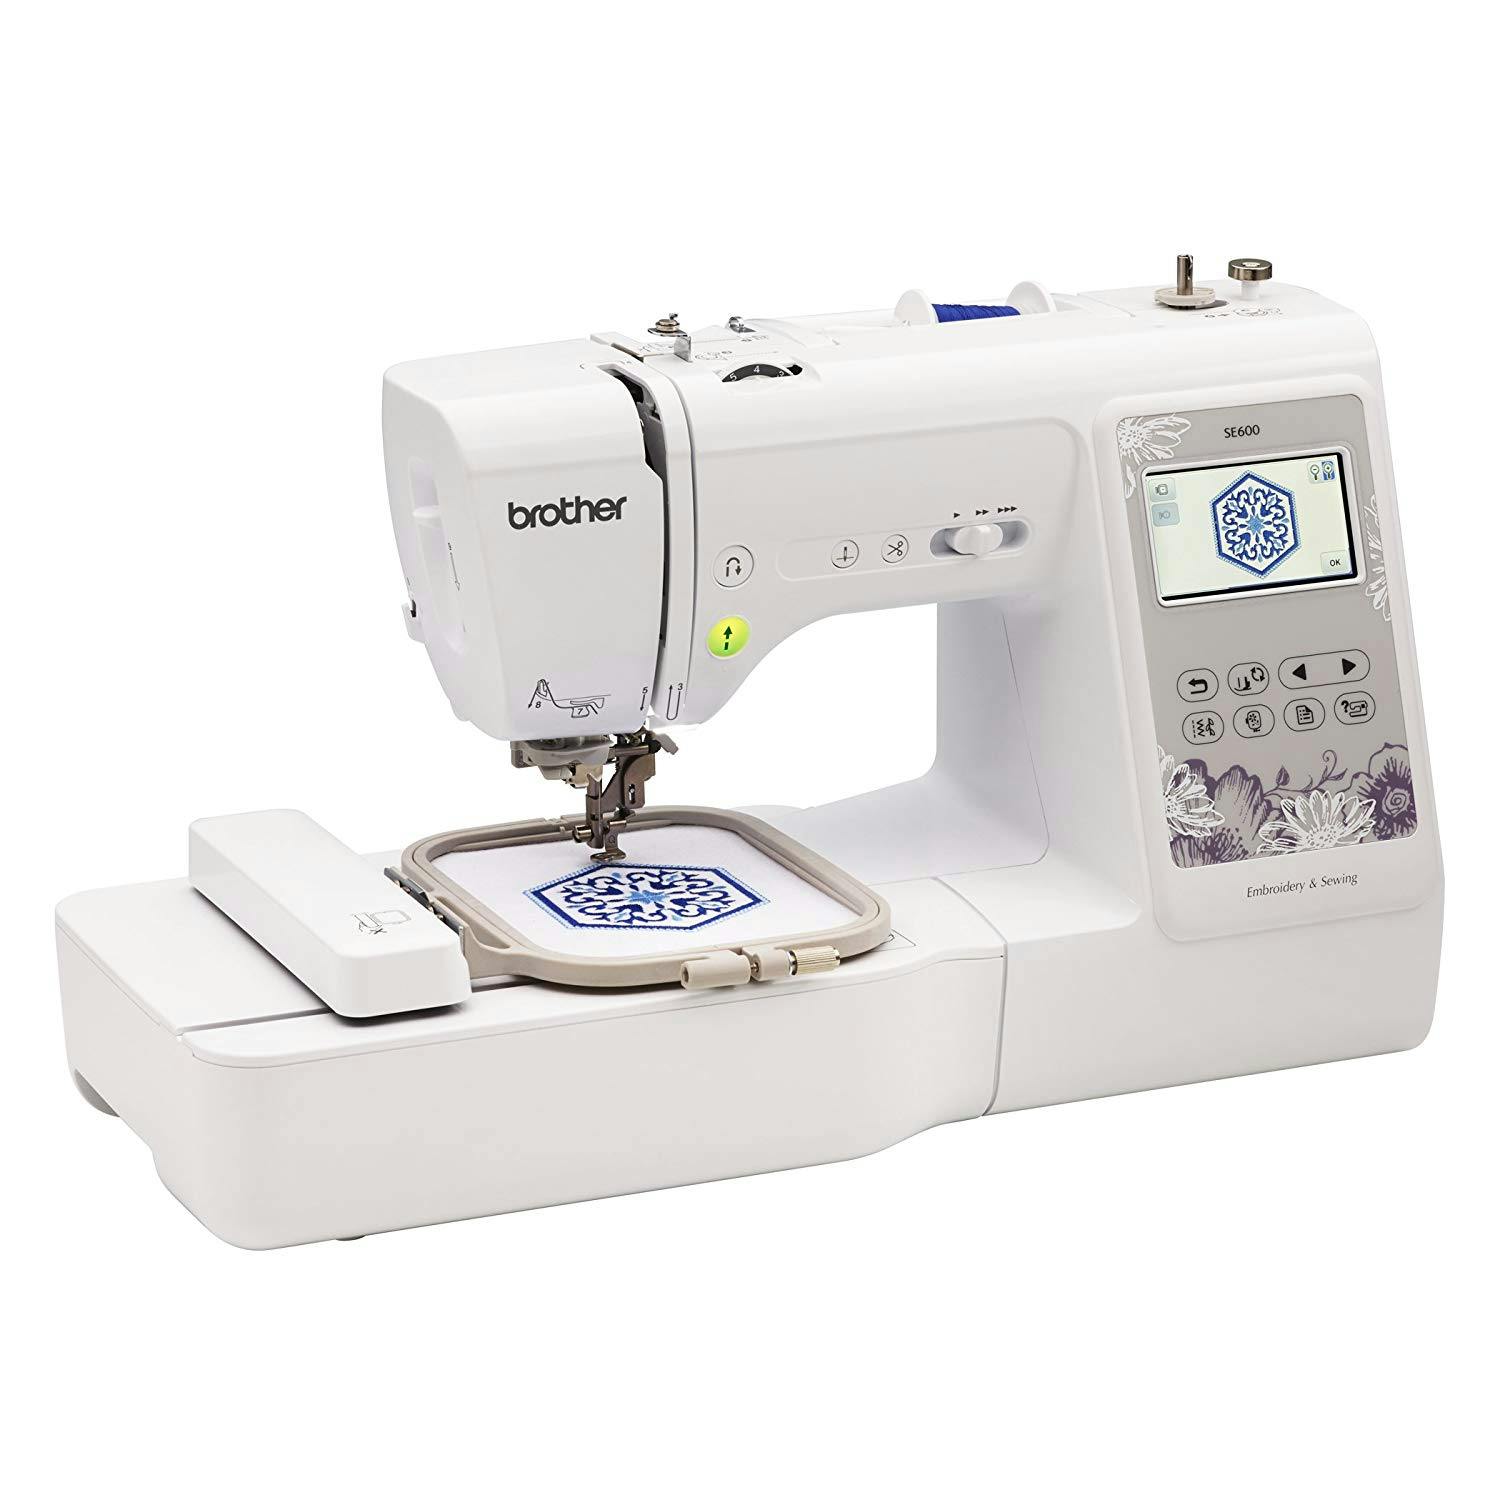 Top 7 Best Brother Embroidery Machines of 2021 [Reviews]